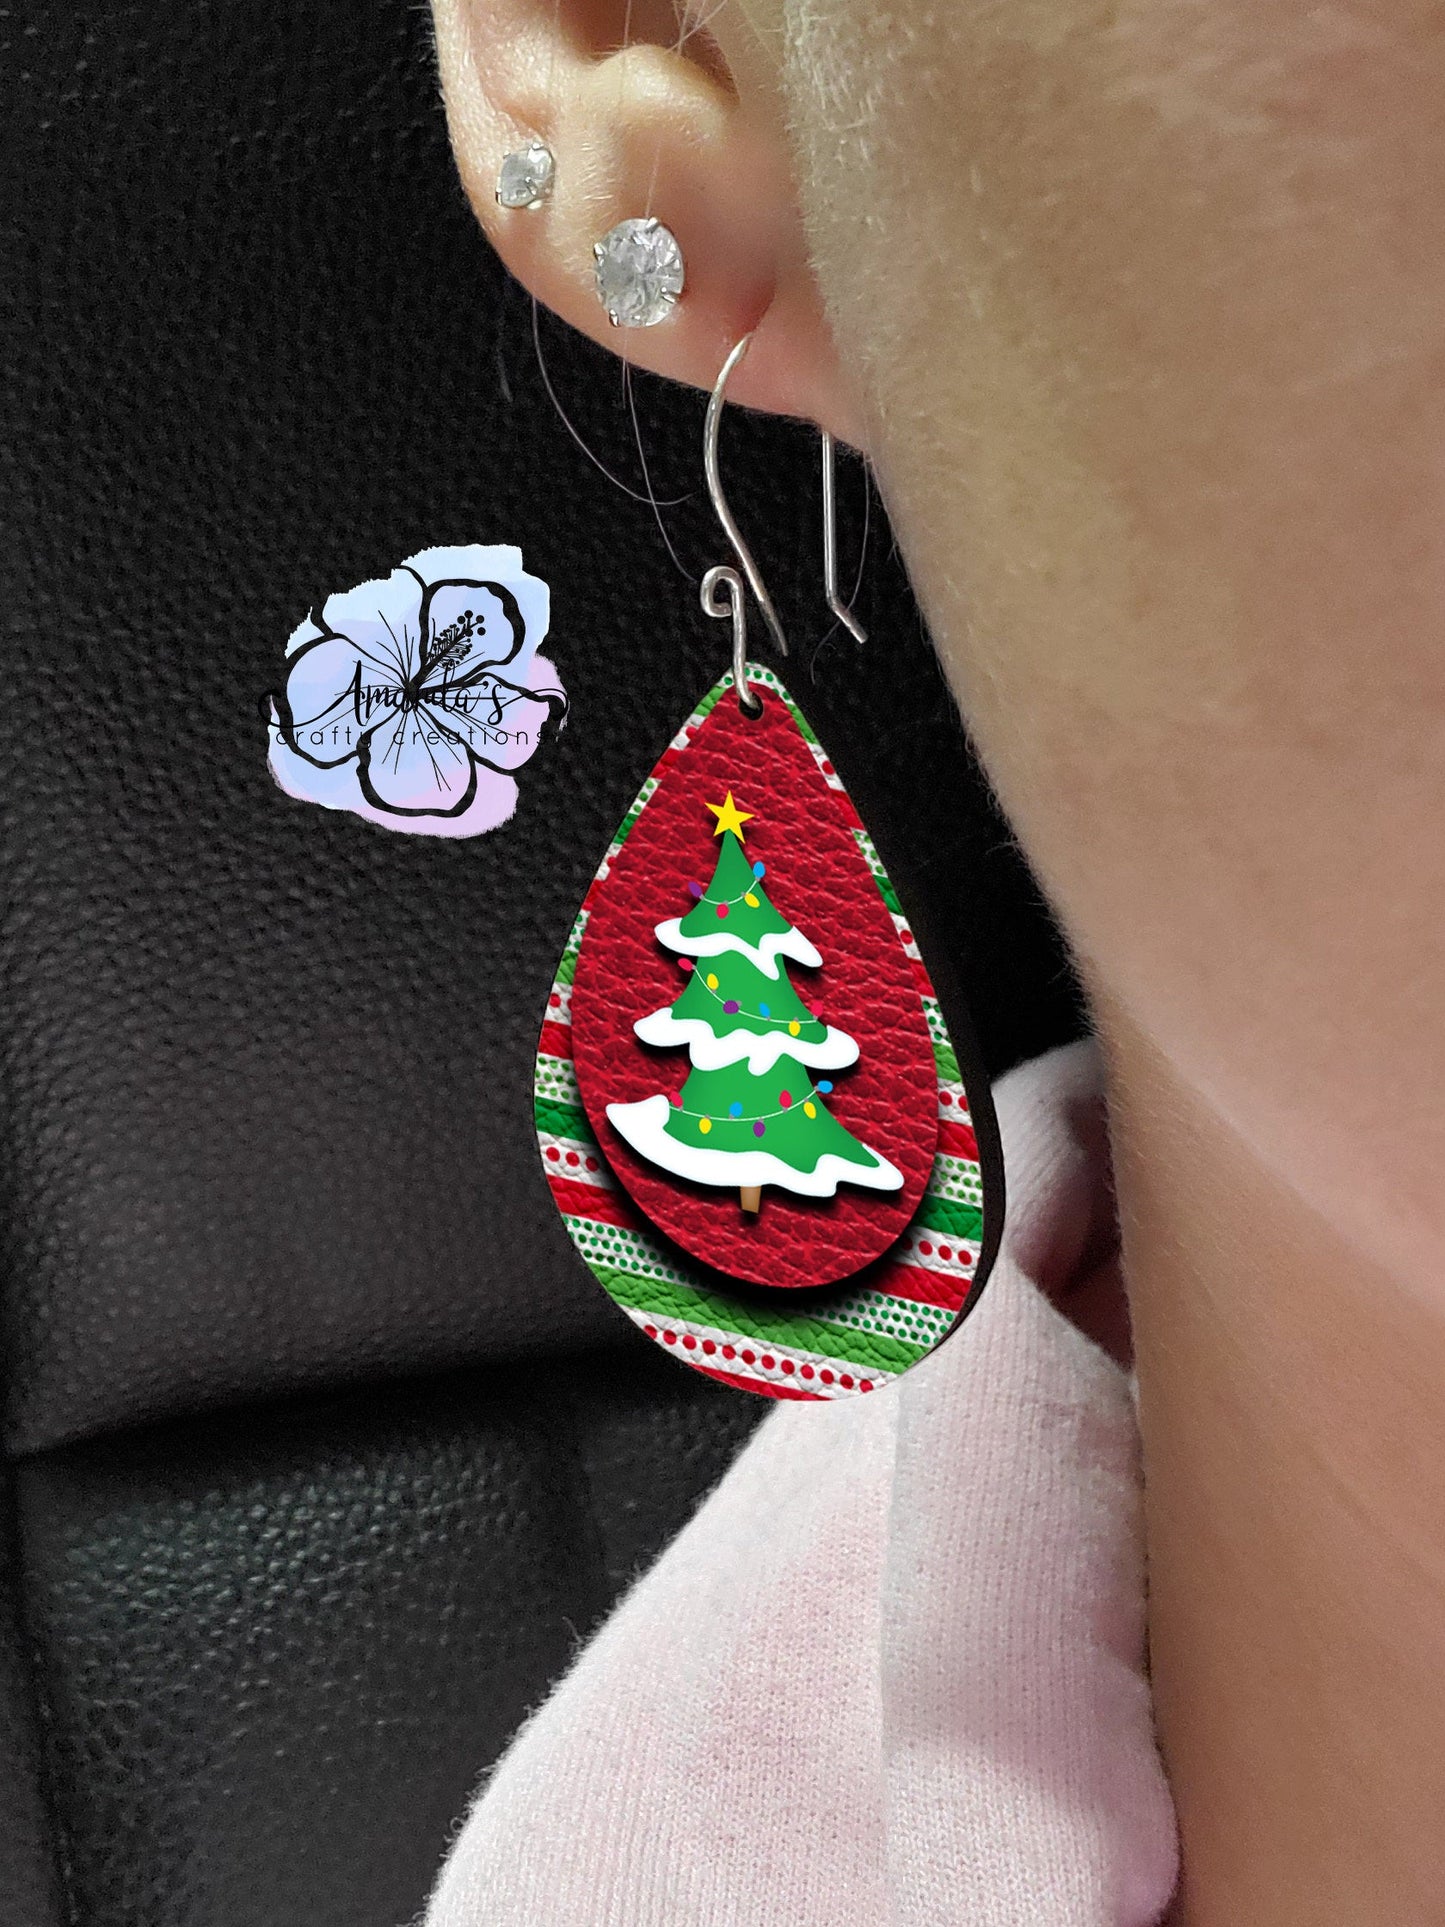 Drop Earrings, Christmas whoville type Christmas tree